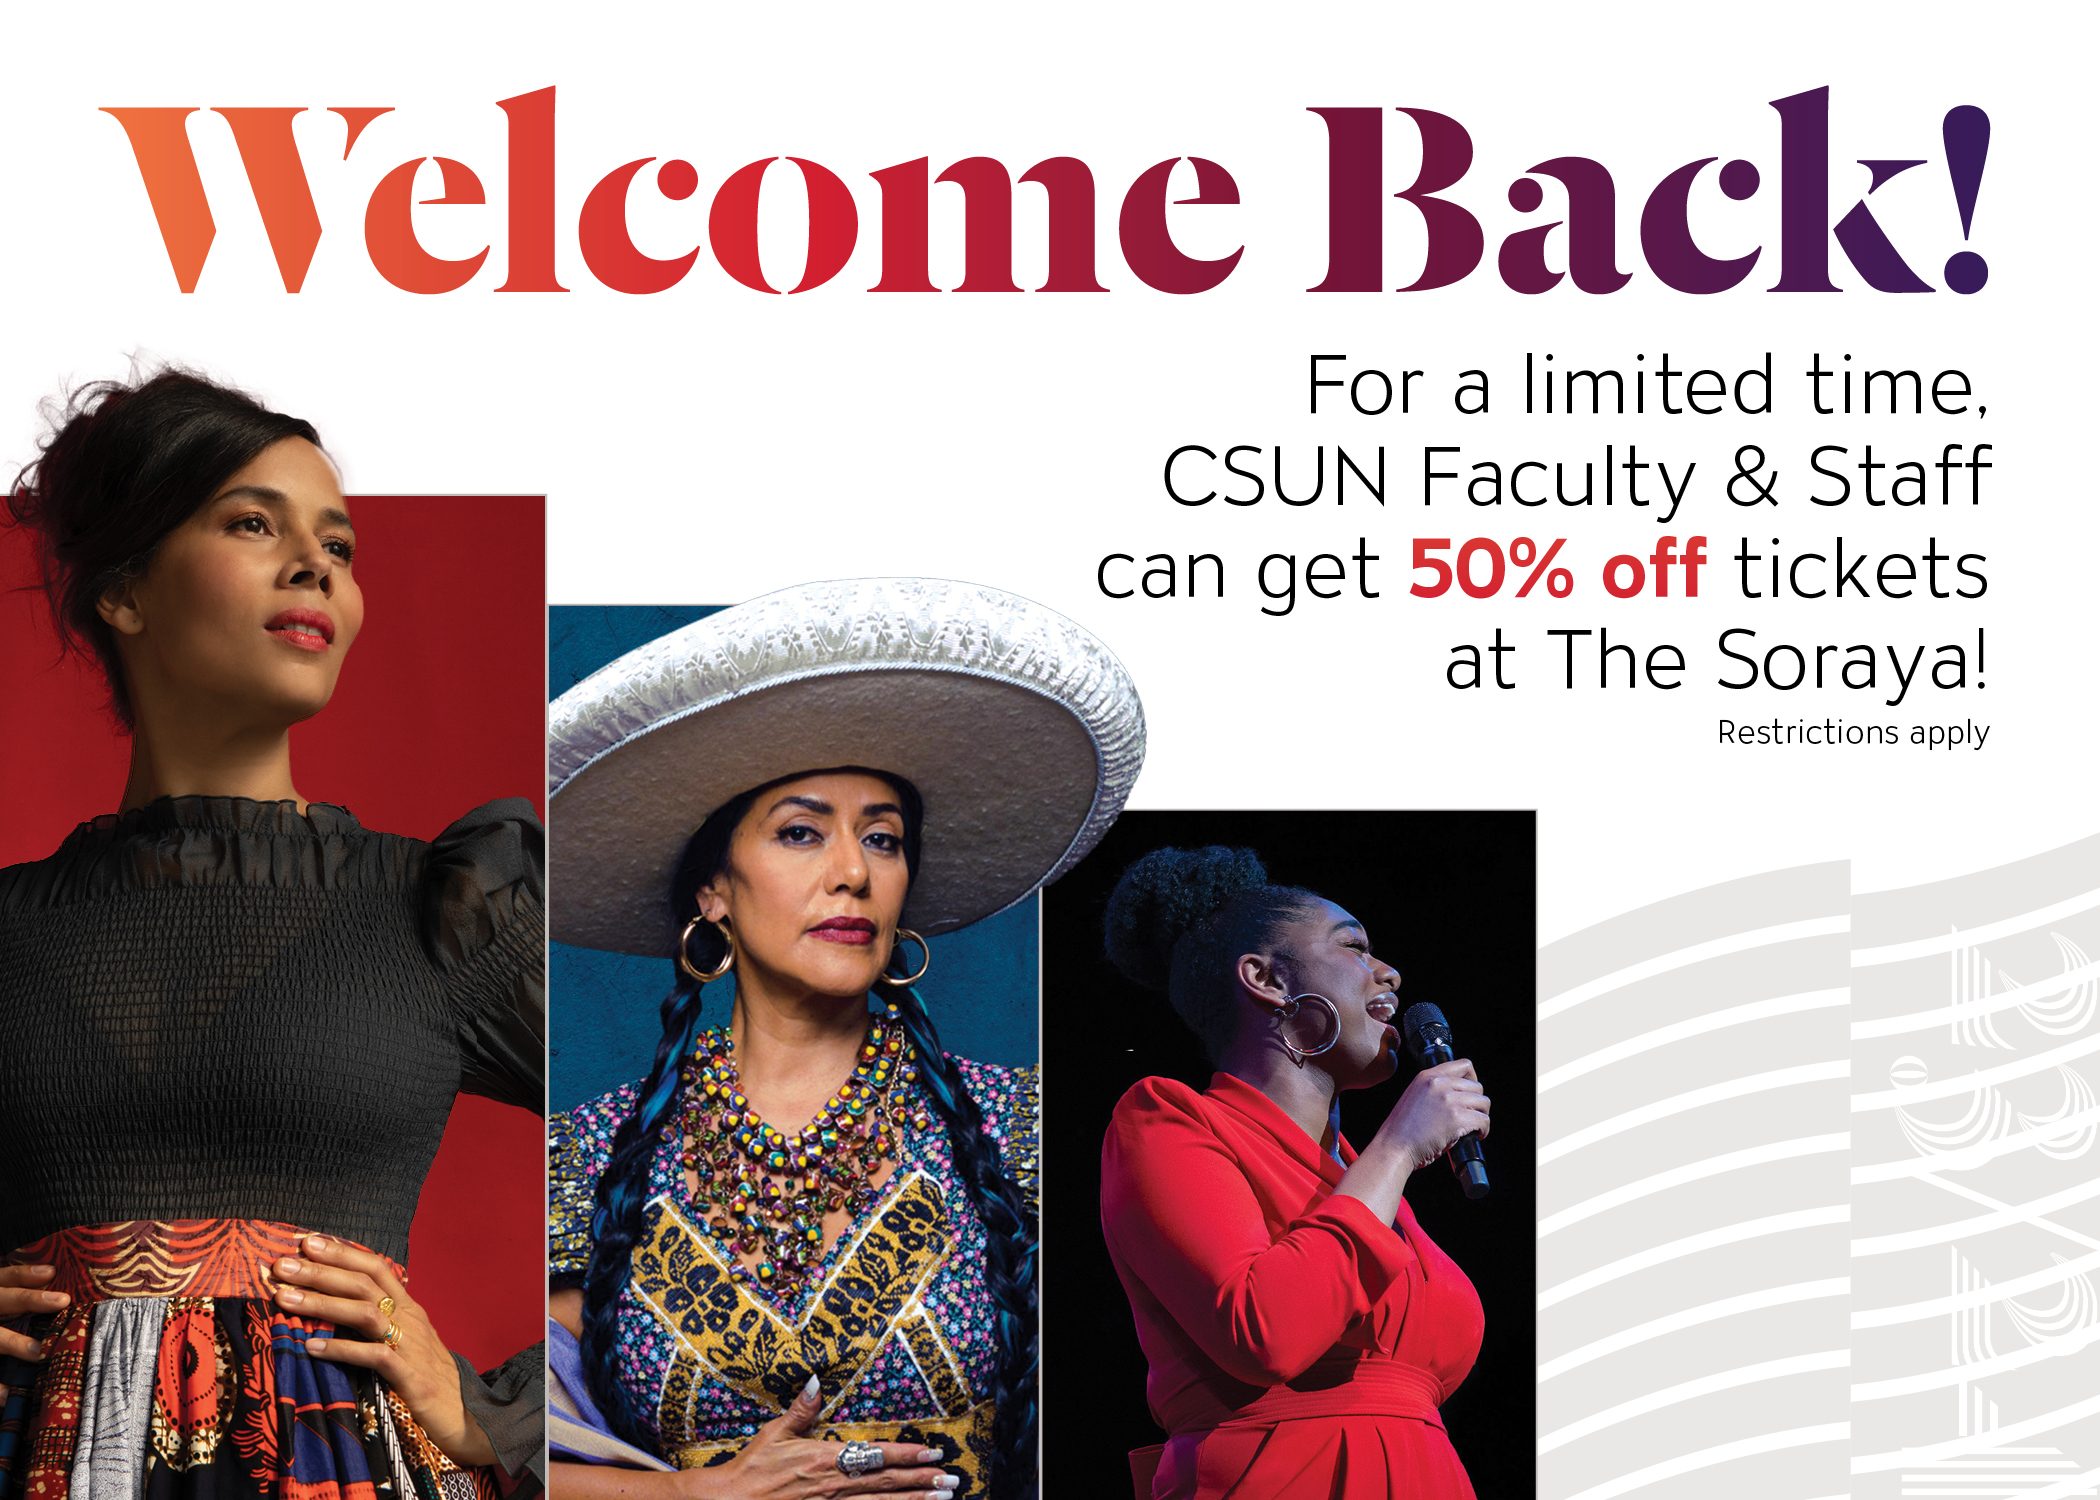 Welcome Back! For a limited time, CSUN faculty & staff can get 50% off tickets at The Soraya! Restrictions apply